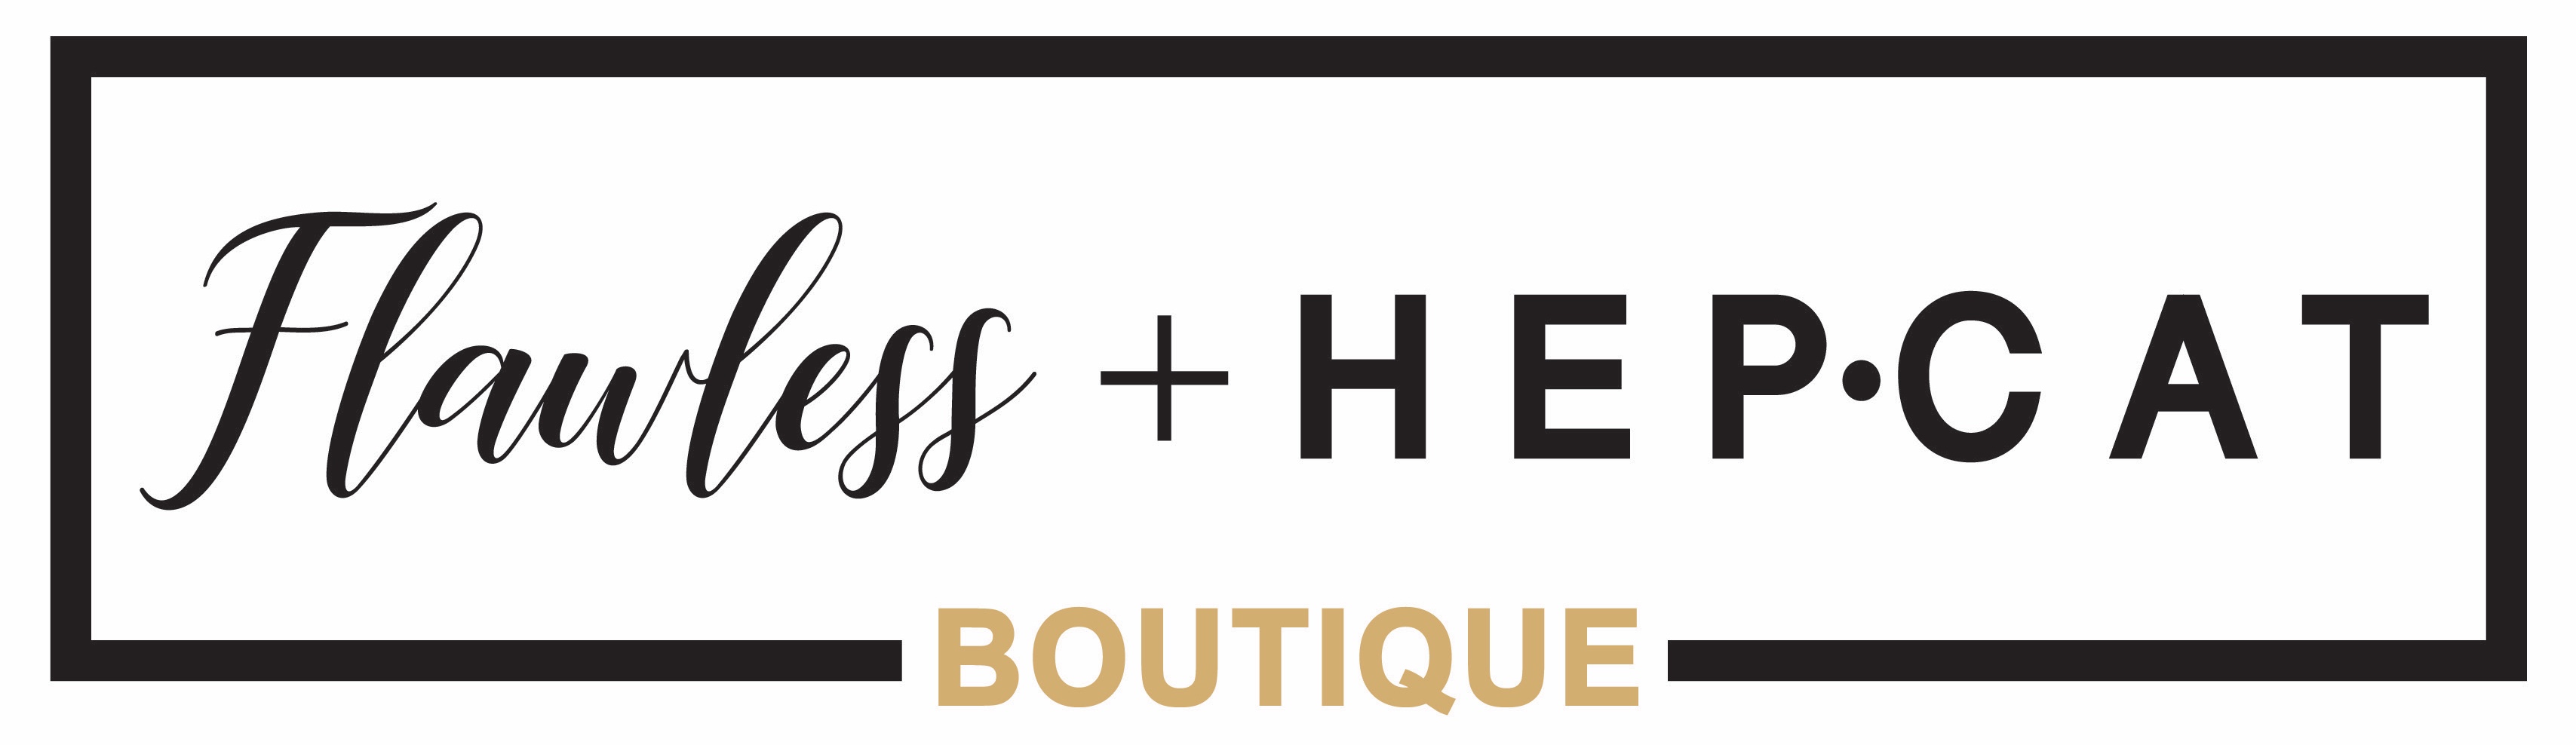 Flawless + Hep.cat Boutique